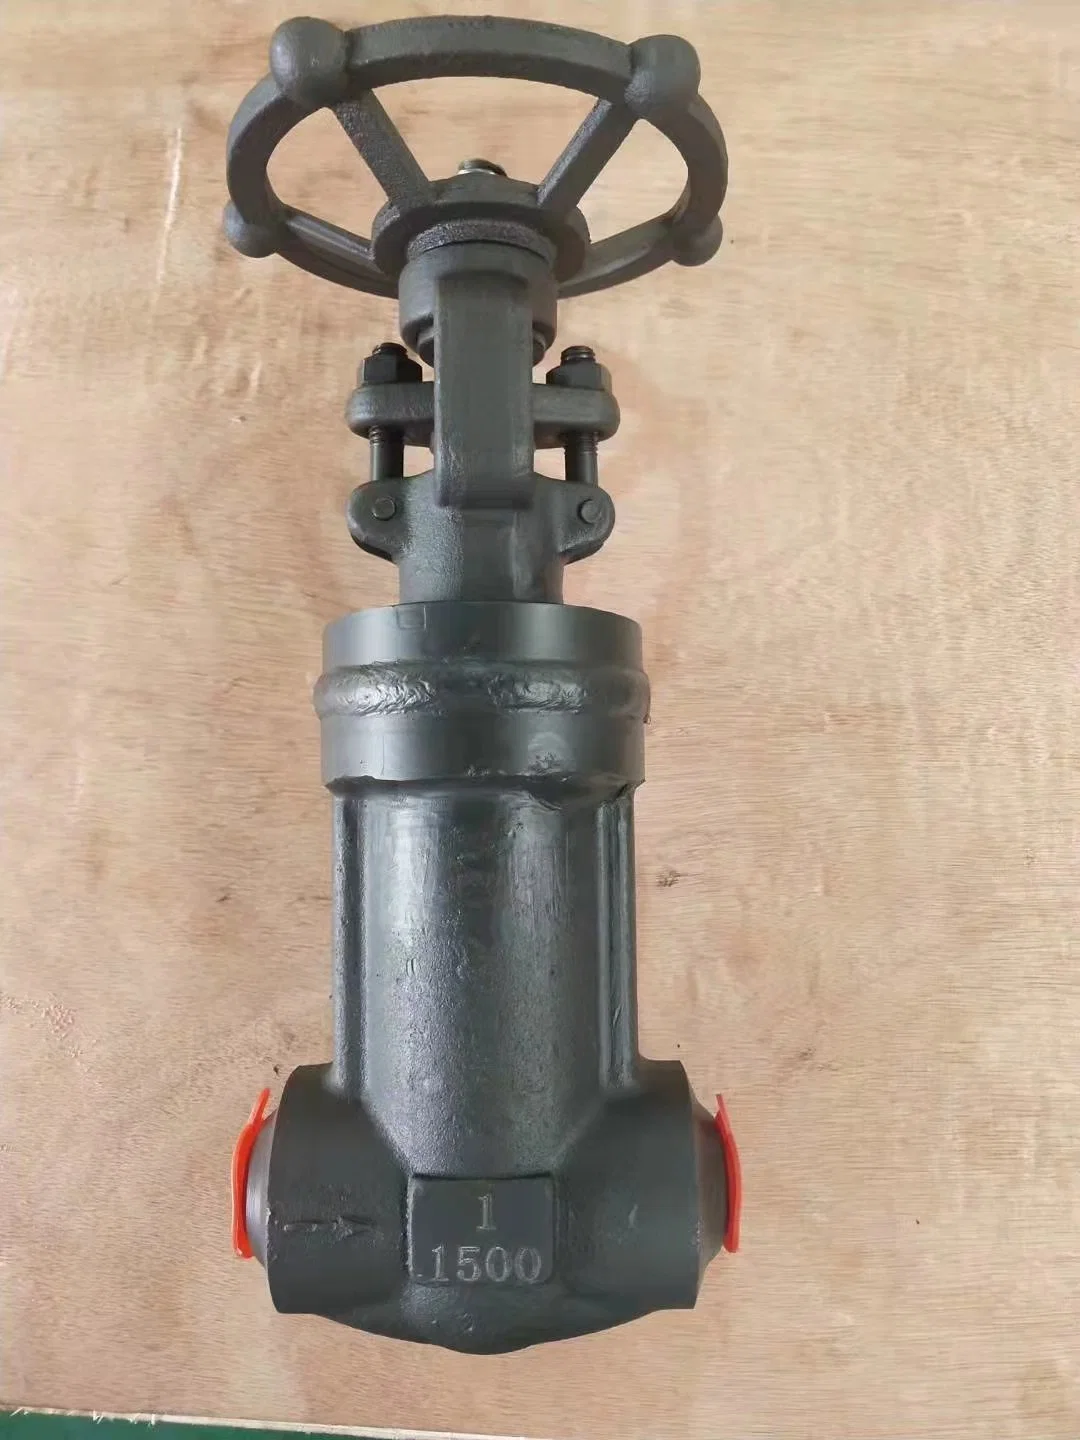 Bolted Bonnet Forged Steel Sw A105n 4 Inch Class 800 Globe Valve